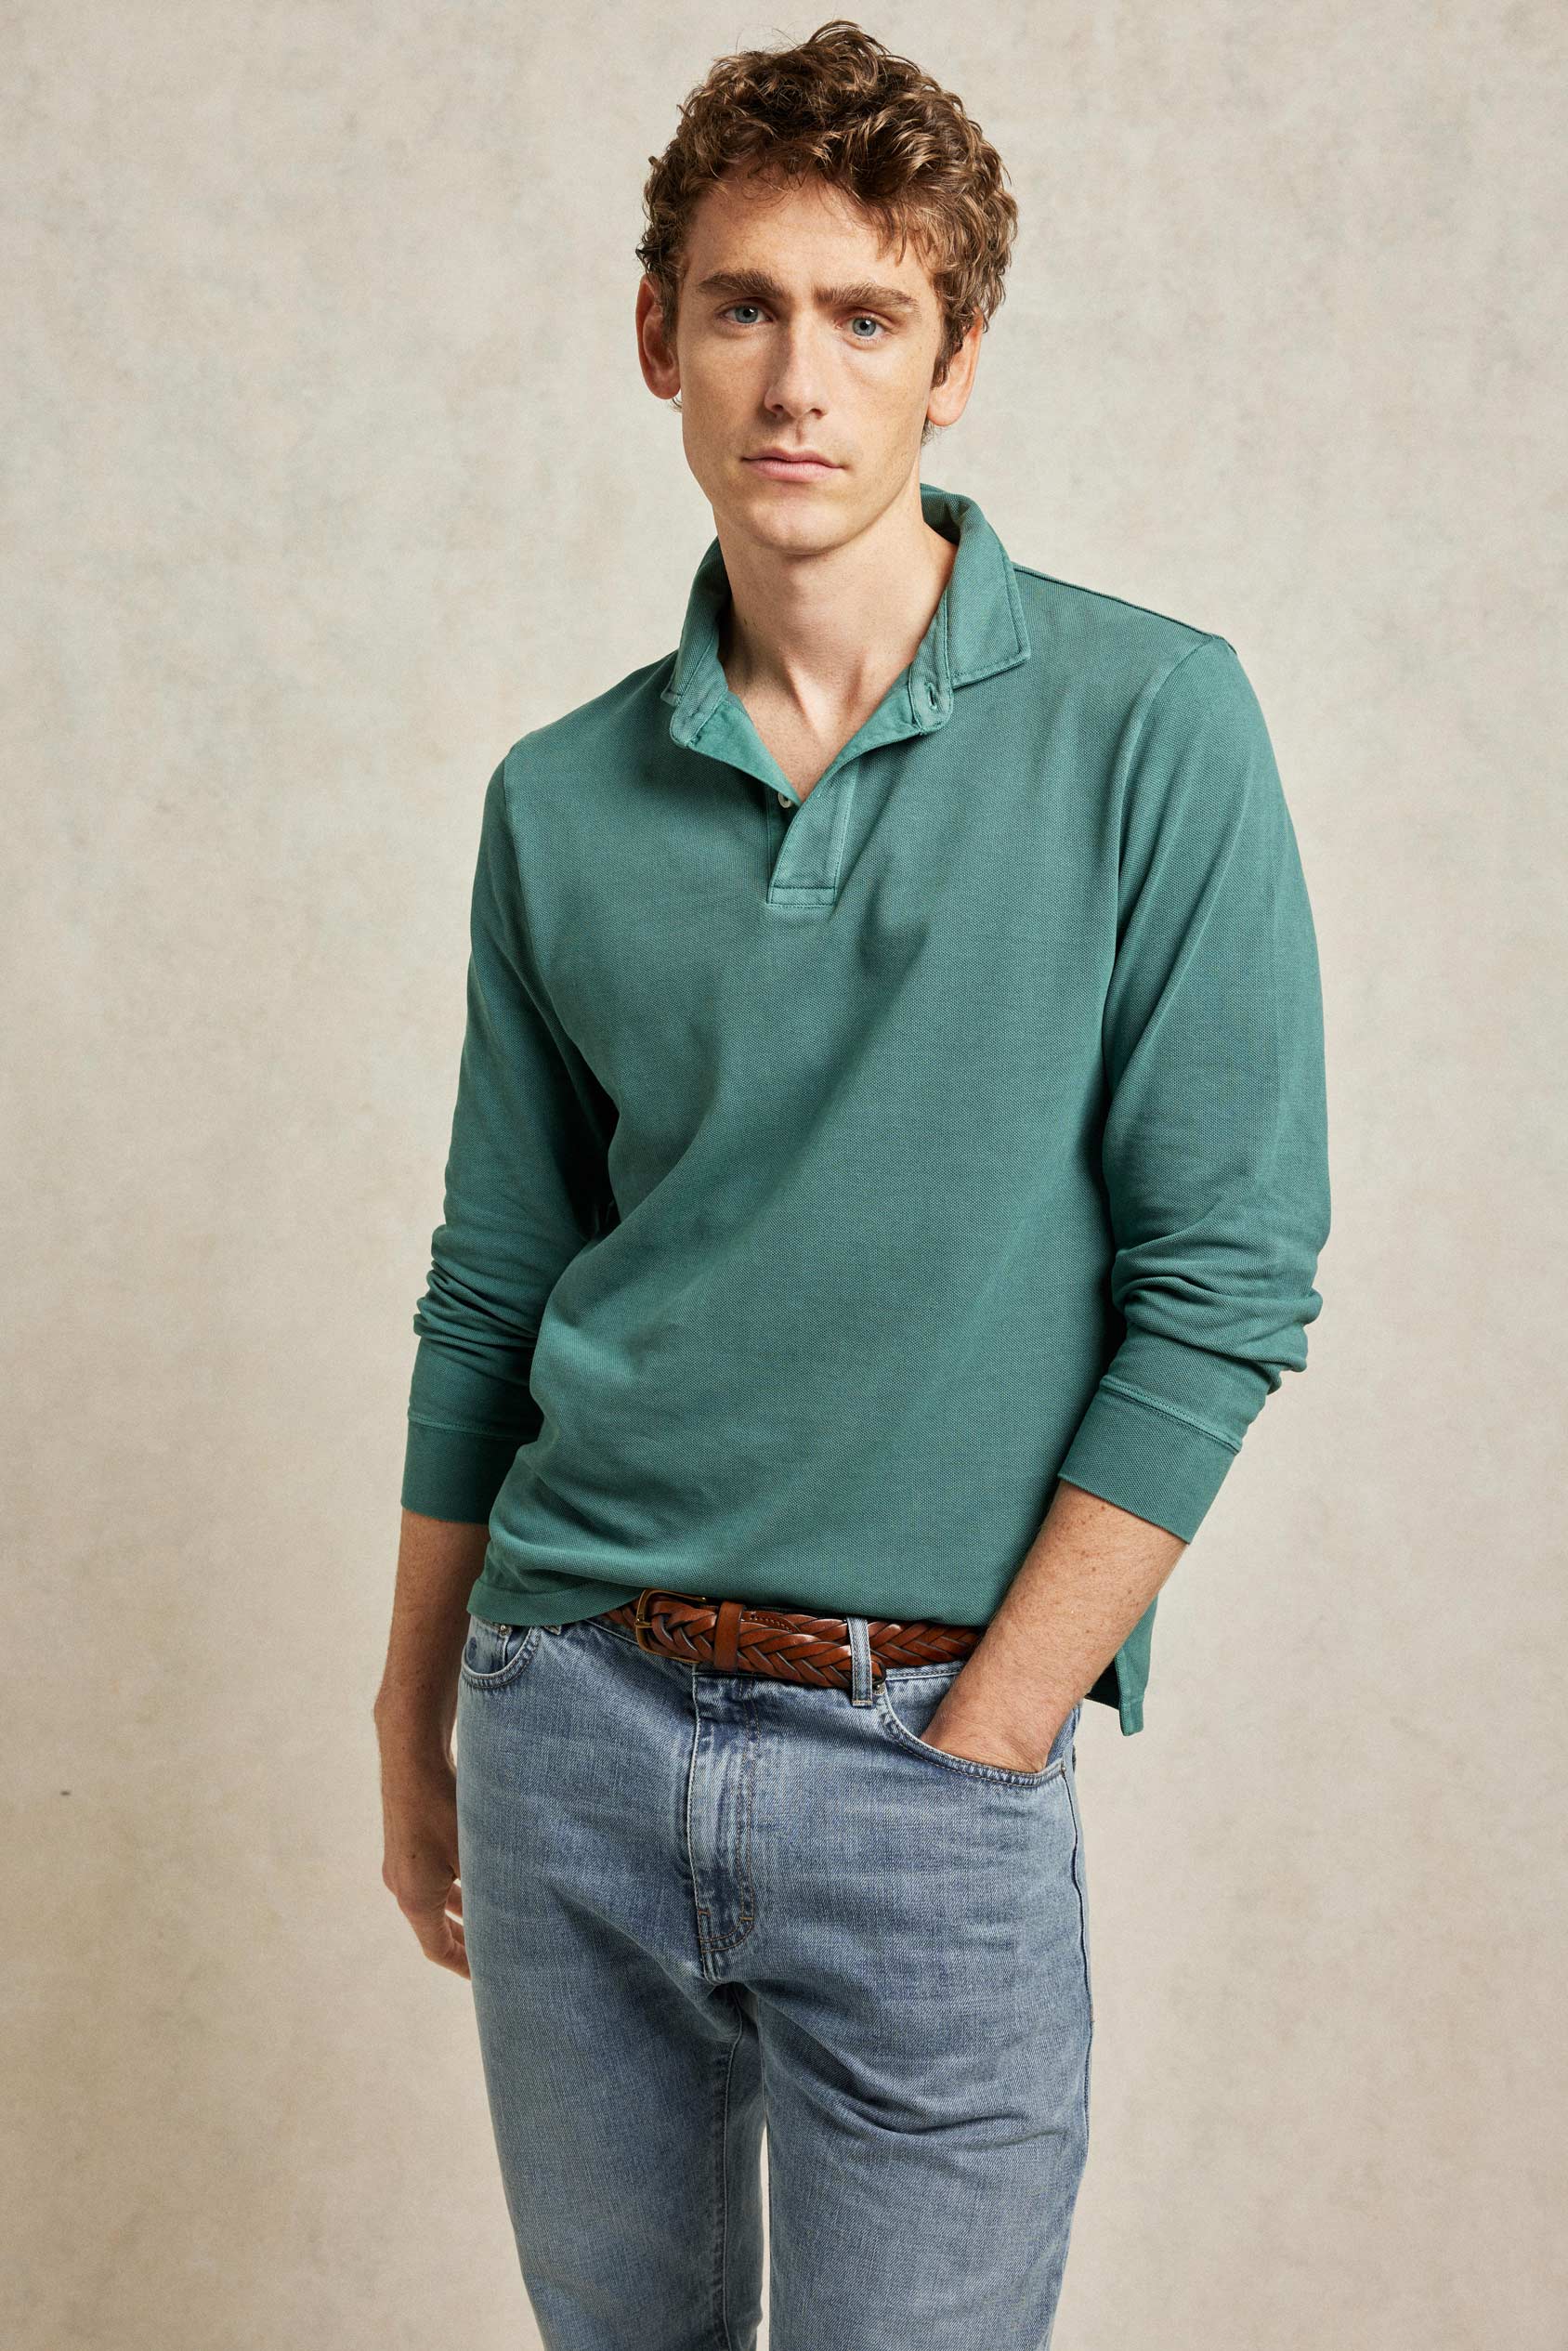 Long sleeve pique garment dyed emerald green men’s polo shirt washed for a soft touch. 100% cotton. Cut from classic cotton pique with a subtle vintage wash. Casual wear. Machine wash. Size S, M, L, XL, XXL.